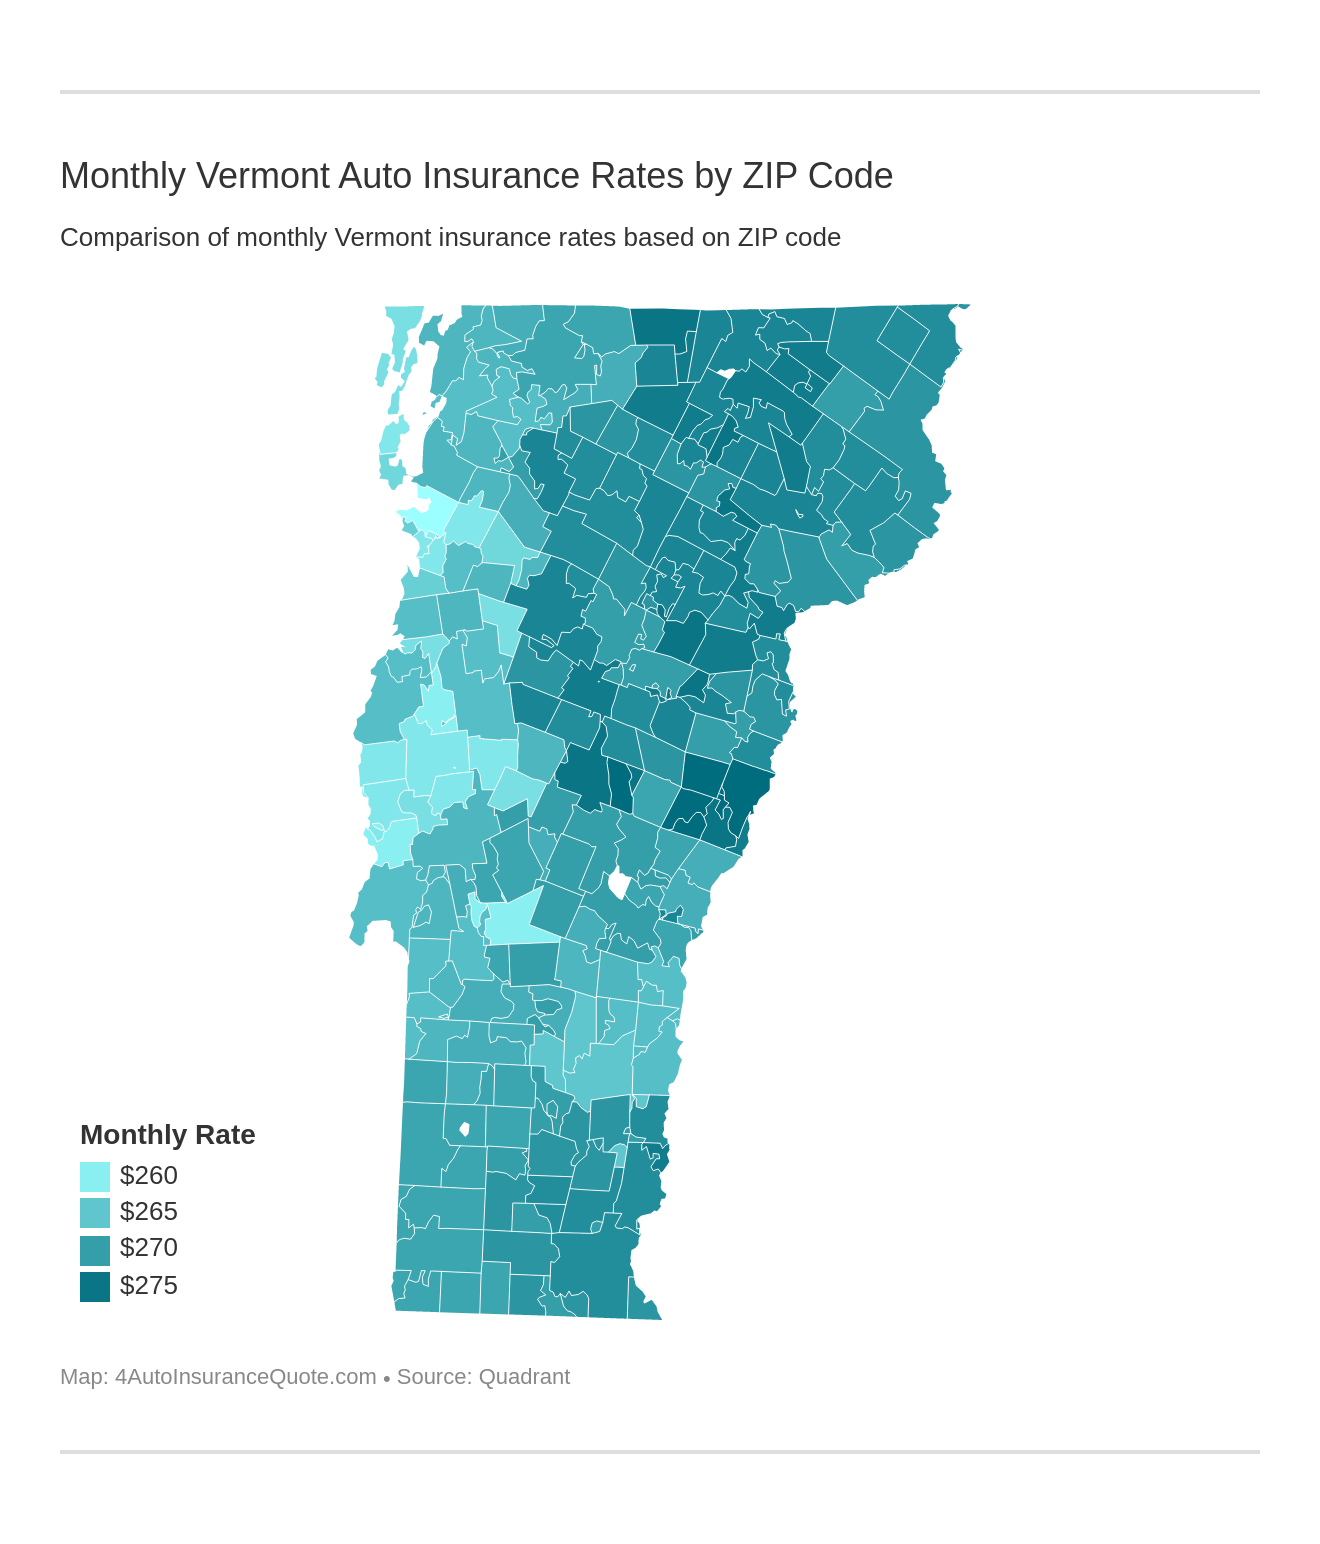 Monthly Vermont Auto Insurance Rates by ZIP Code